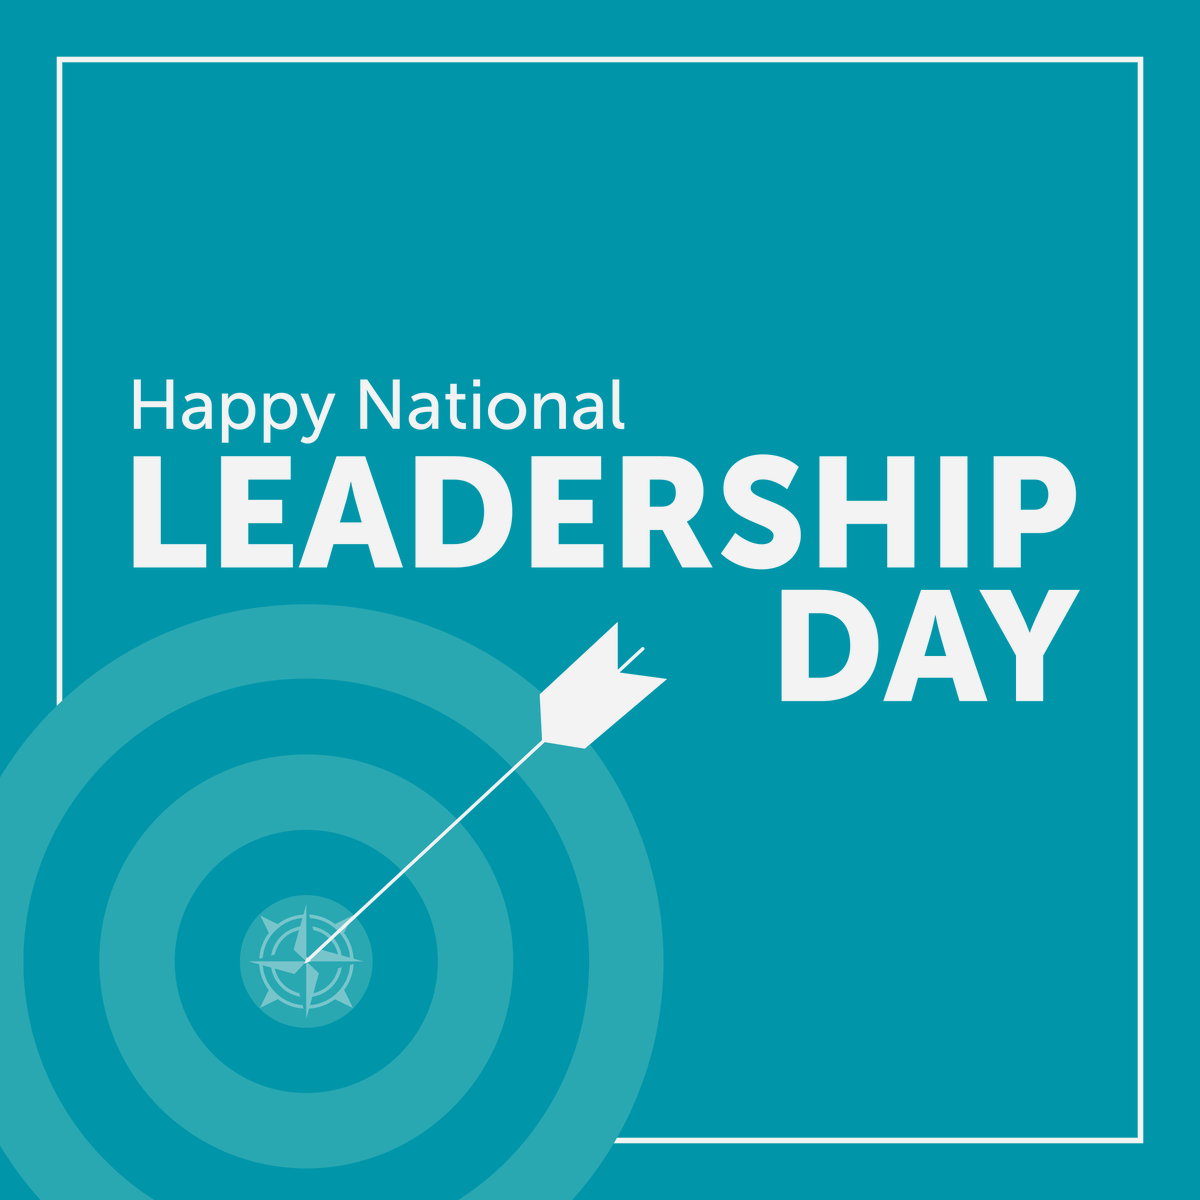 The Plank Center is excited to celebrate National Leadership Day! Today, we are honoring all our incredible leaders in the public relations profession. Join us in celebrating by sharing the best leadership advice you've received. #plankcenterPR #NationalLeadershipDay #PRLeaders